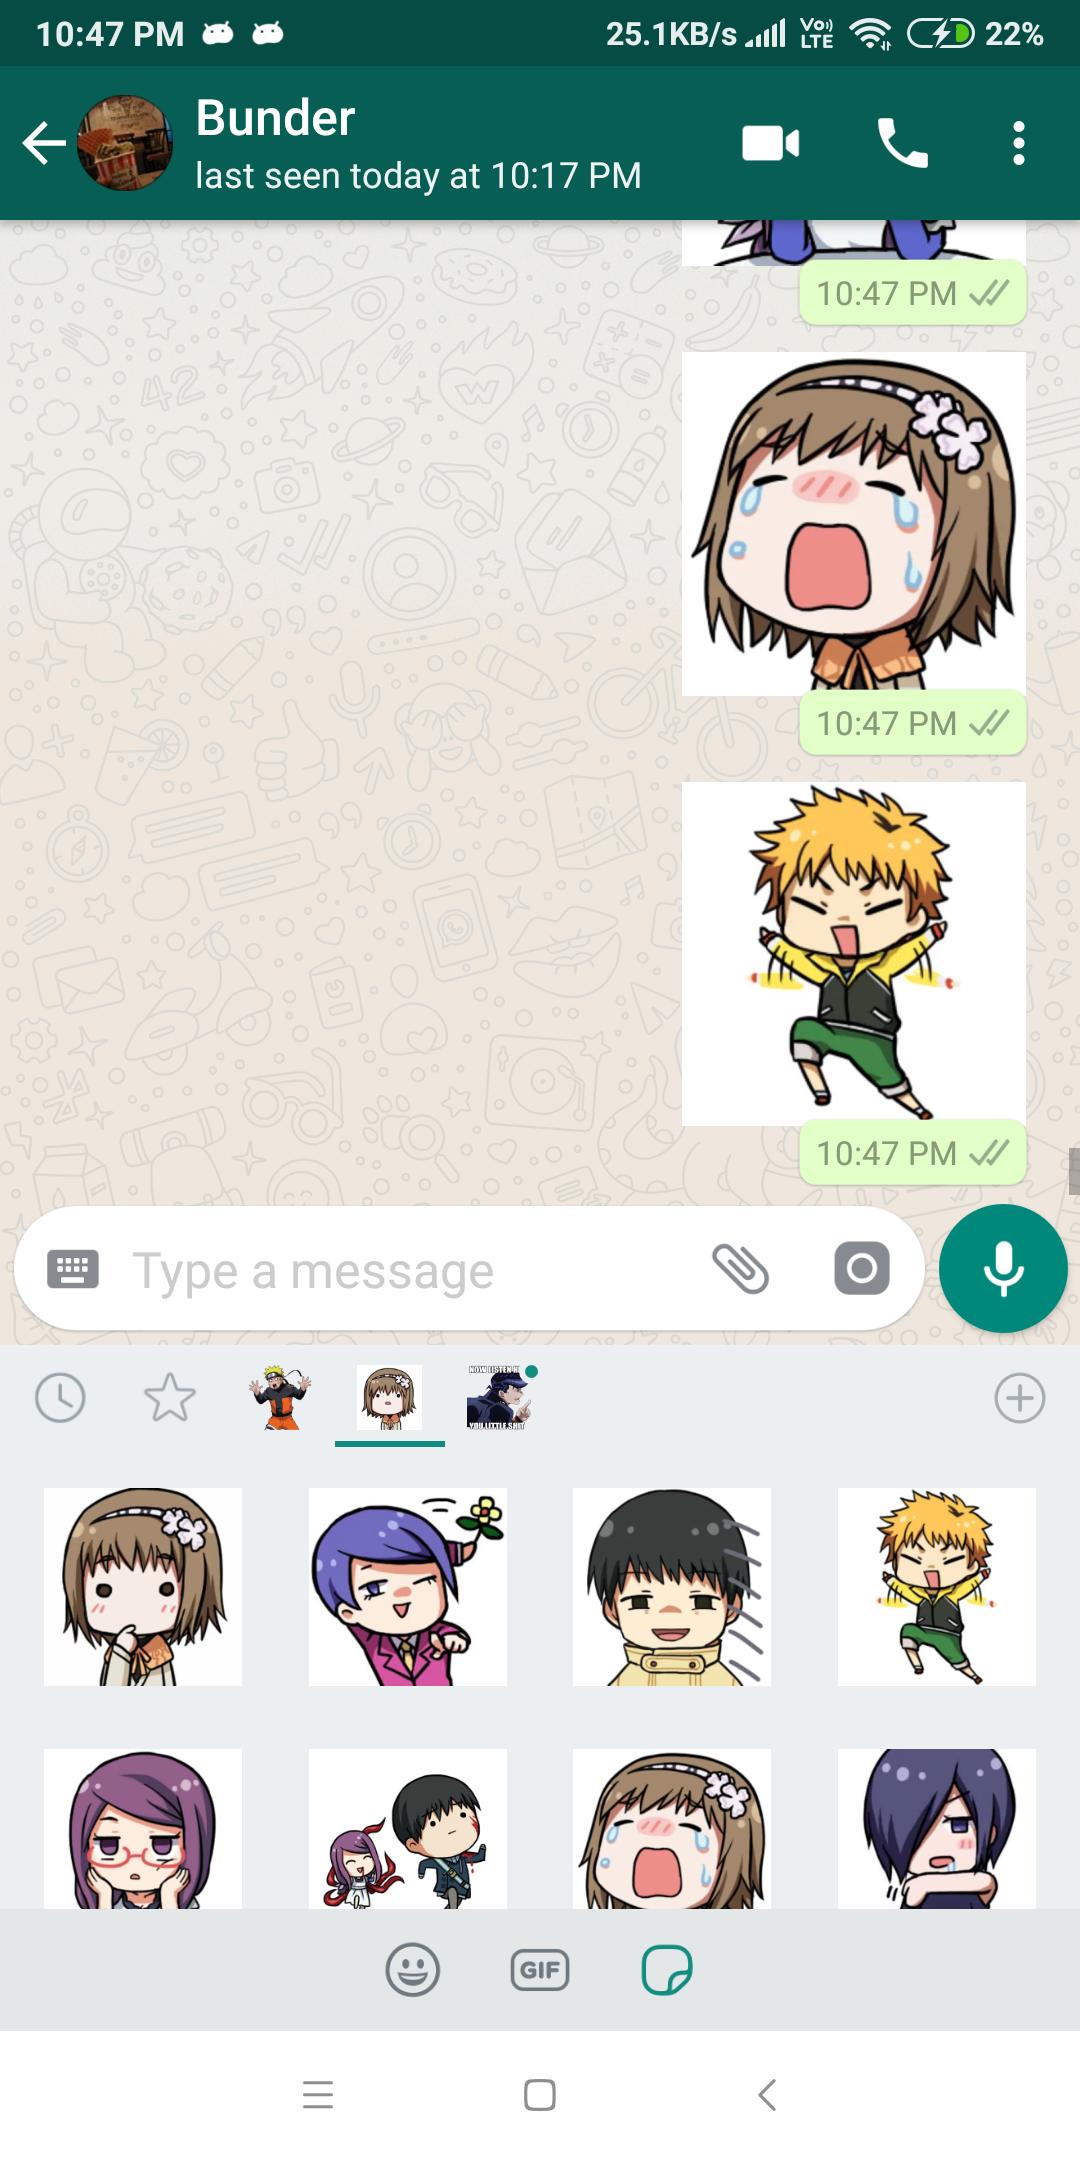 New Anime Sticker For Wa Wastickerapps For Android Apk Download